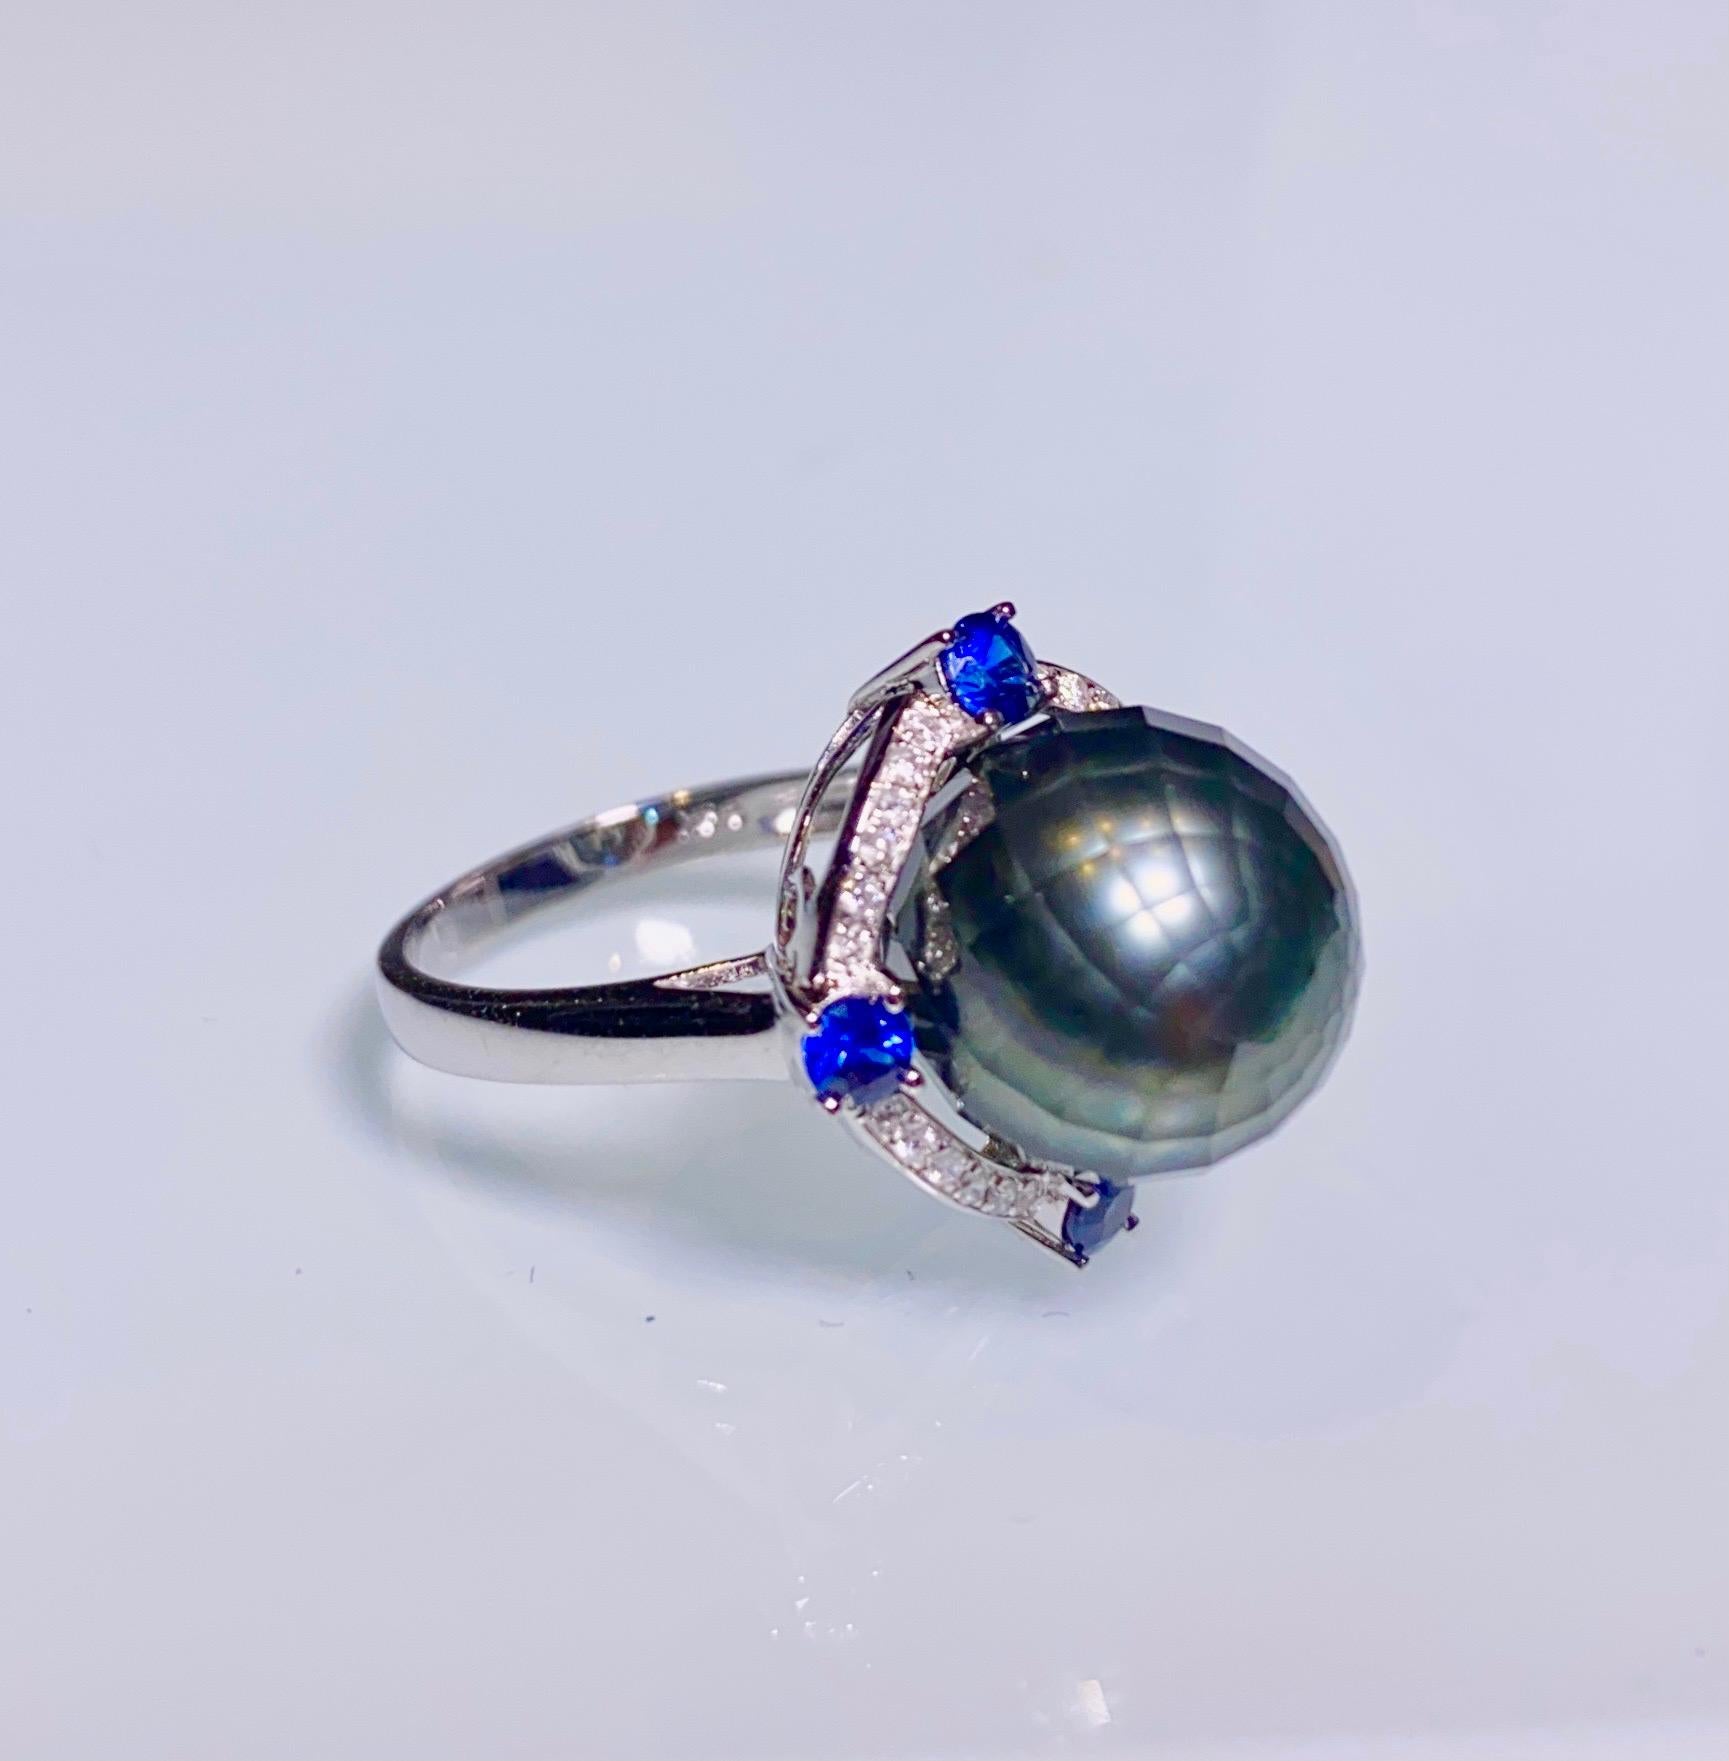 A 11.4 mm Faceted Black Tahitian Pearl, Blue Sapphire and Diamond Ring in 18k White Gold
It consisted of a Round Shape Faceted Tahitian Pearl
Blue Sapphire
Natural Diamond 

US RIng Size is 6 1/2 , The Inner Diameter of the Ring is 16.9 mm